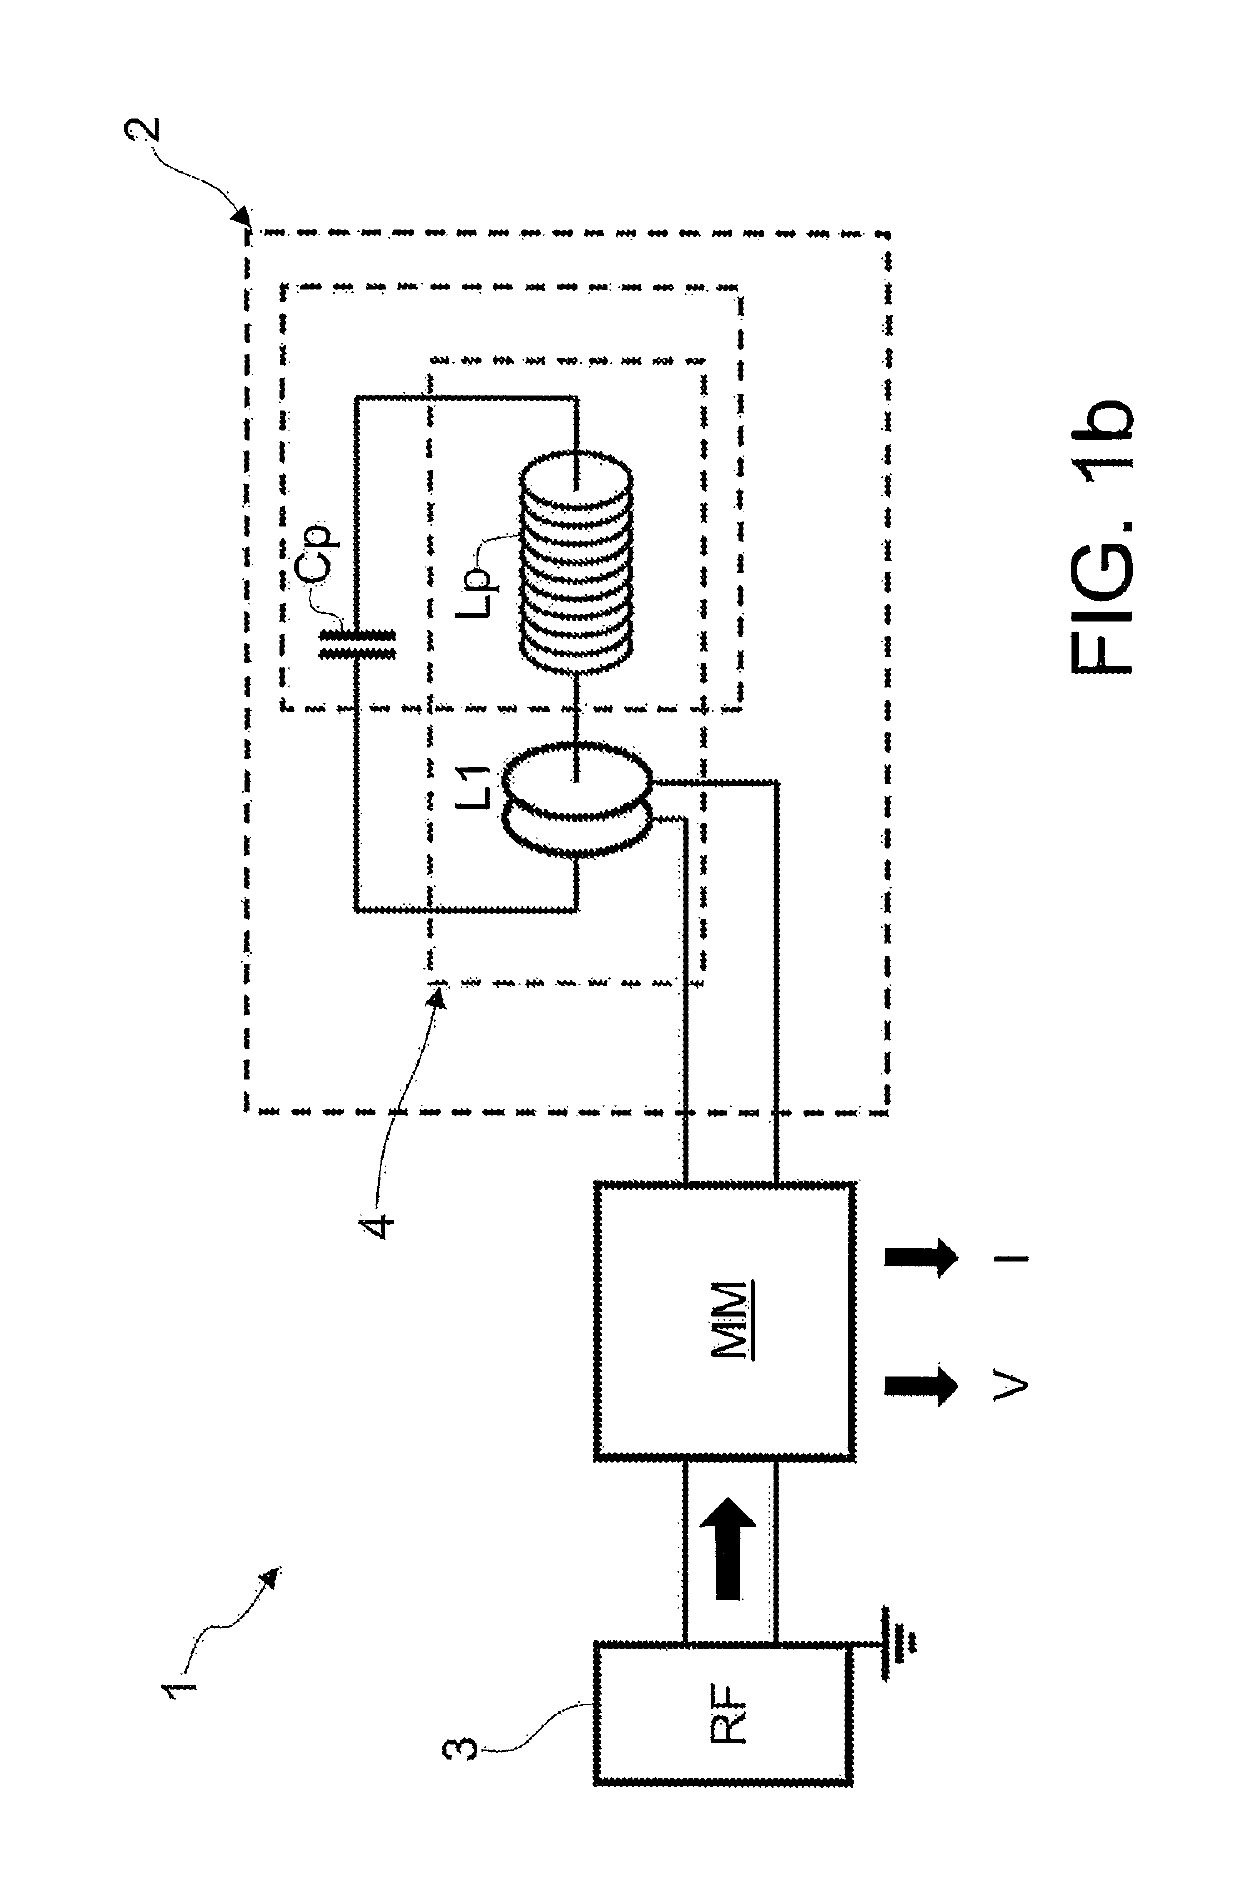 Device intrinsically designed to resonate, suitable for RF power transfer as well as group including such device and usable for the production of plasma